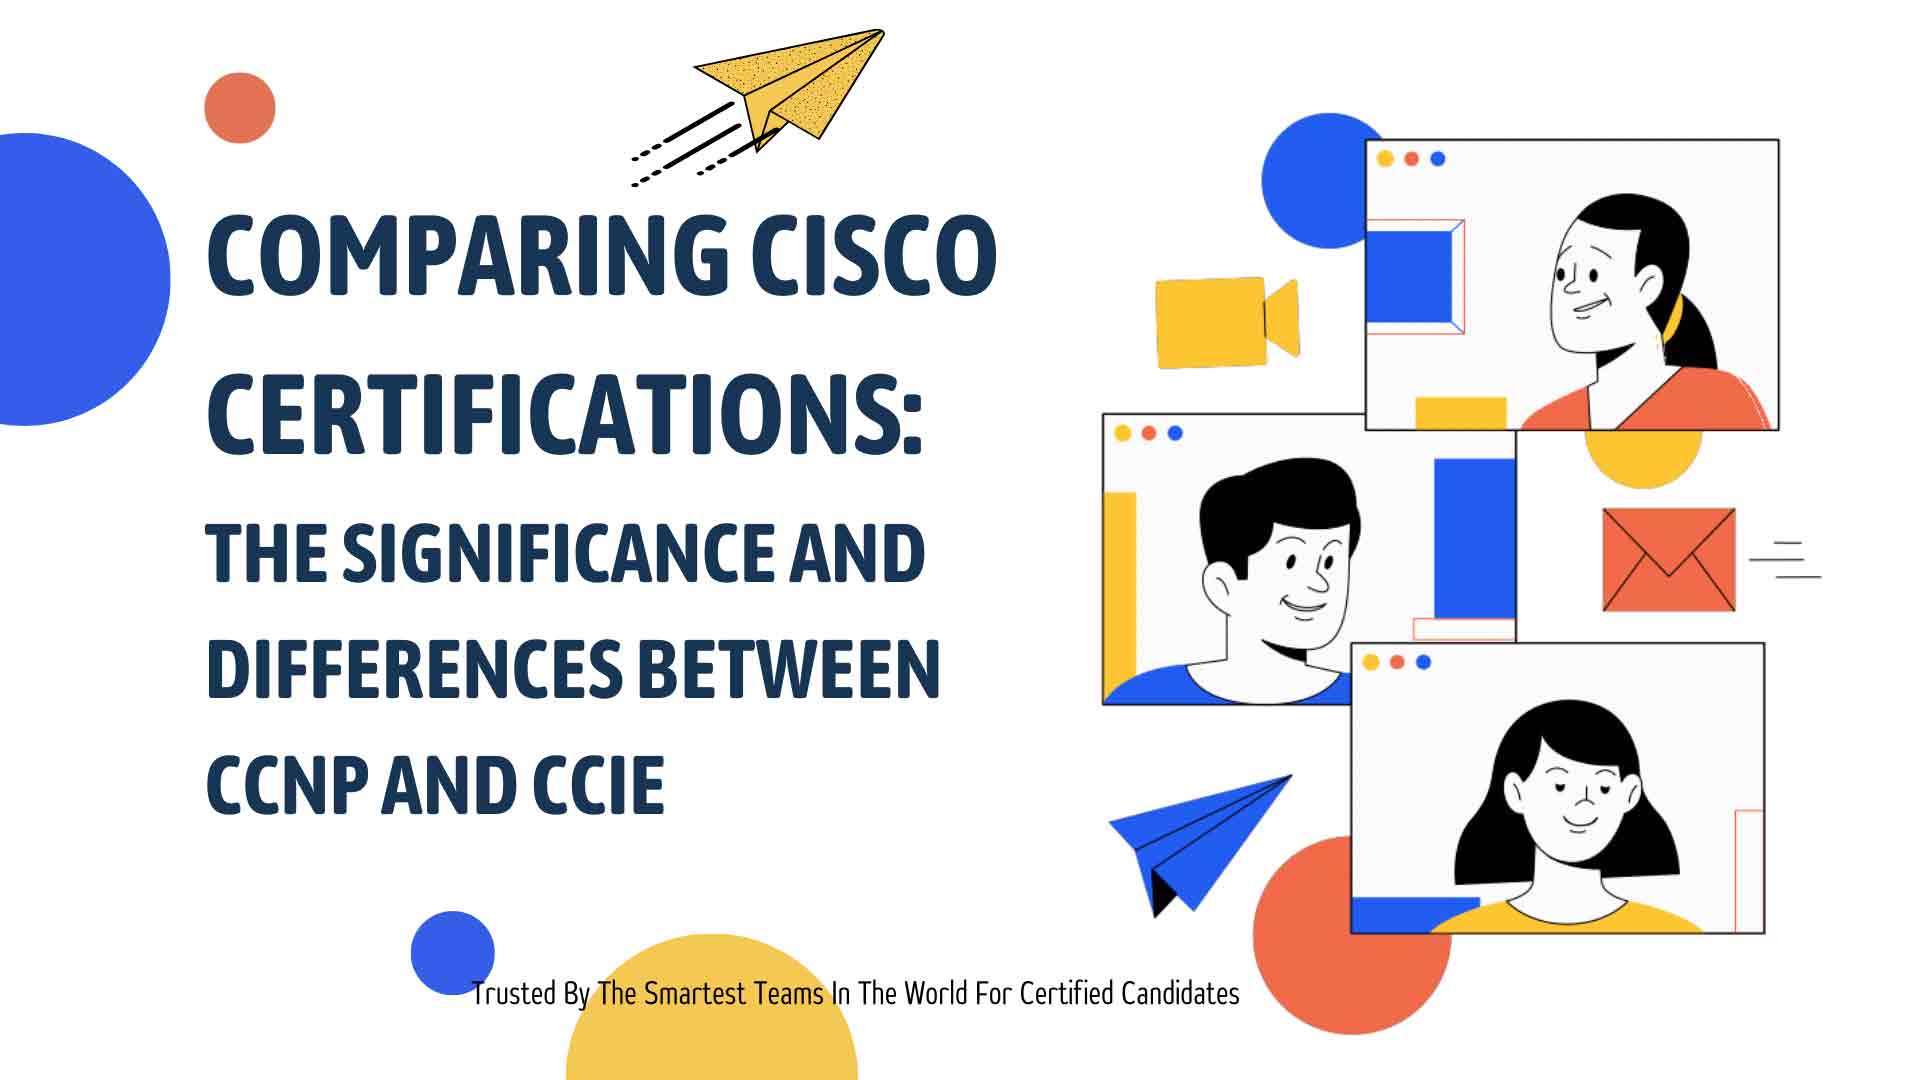 Significance and Differences between CCNP and CCIE